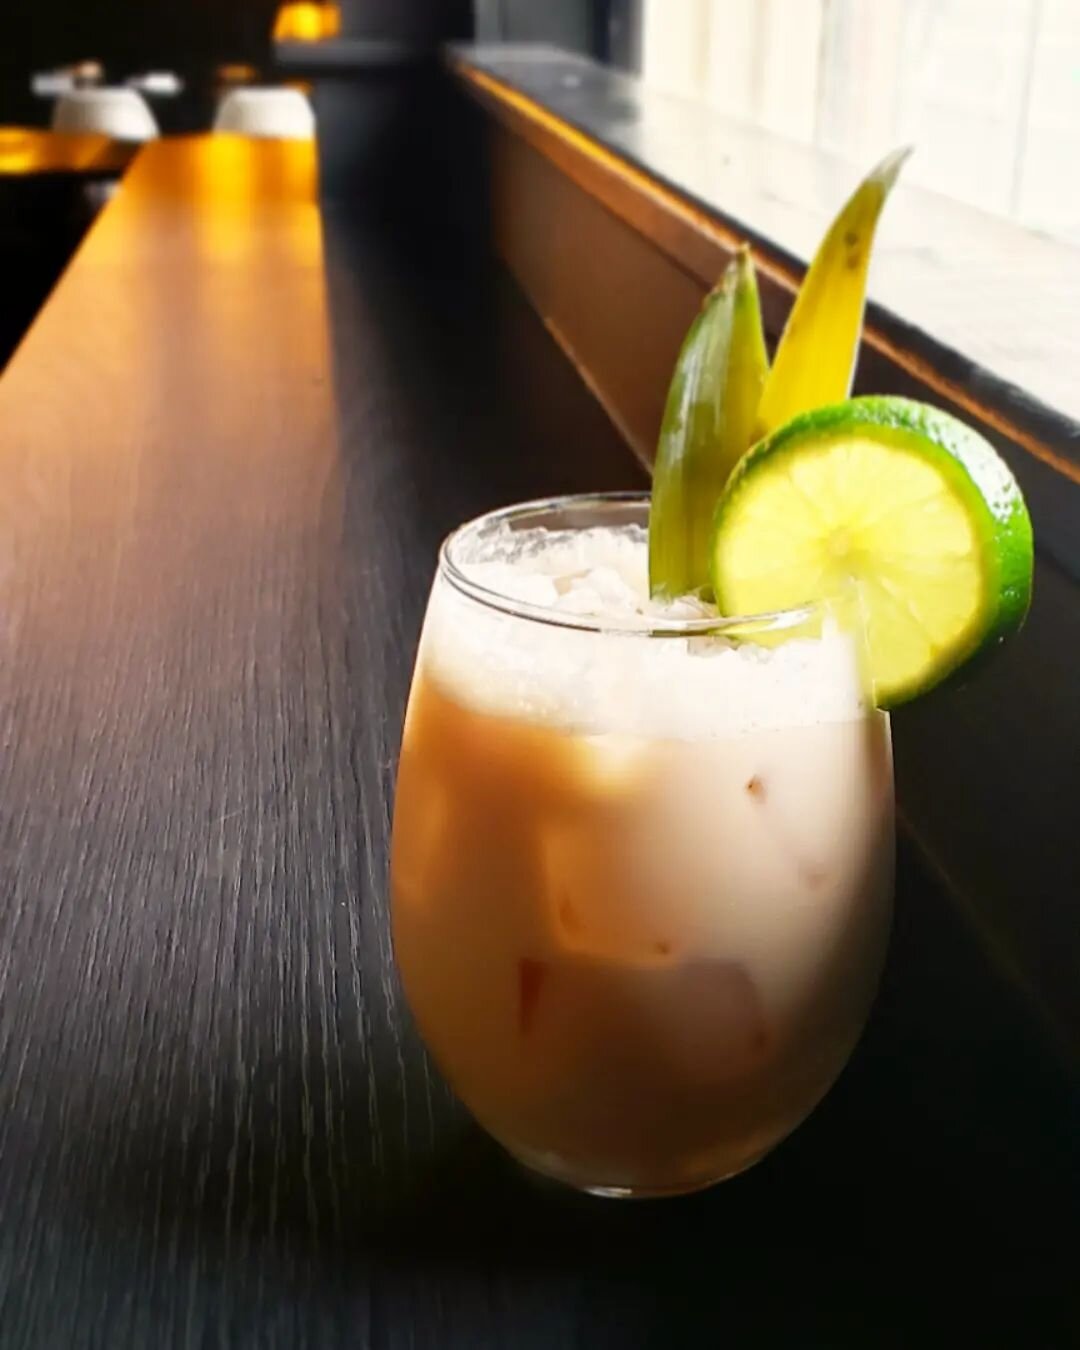 &quot;Definitely Not a Pina Colada&quot;
Our delicious mocktail option for your induldgment. Join us for our new spring menu items!
.
.
.
#azyun #azyunrestaurant #mocktails #toronto #foodie #markham #markhamfood #markhameats #topchoice #zeroproof #yy